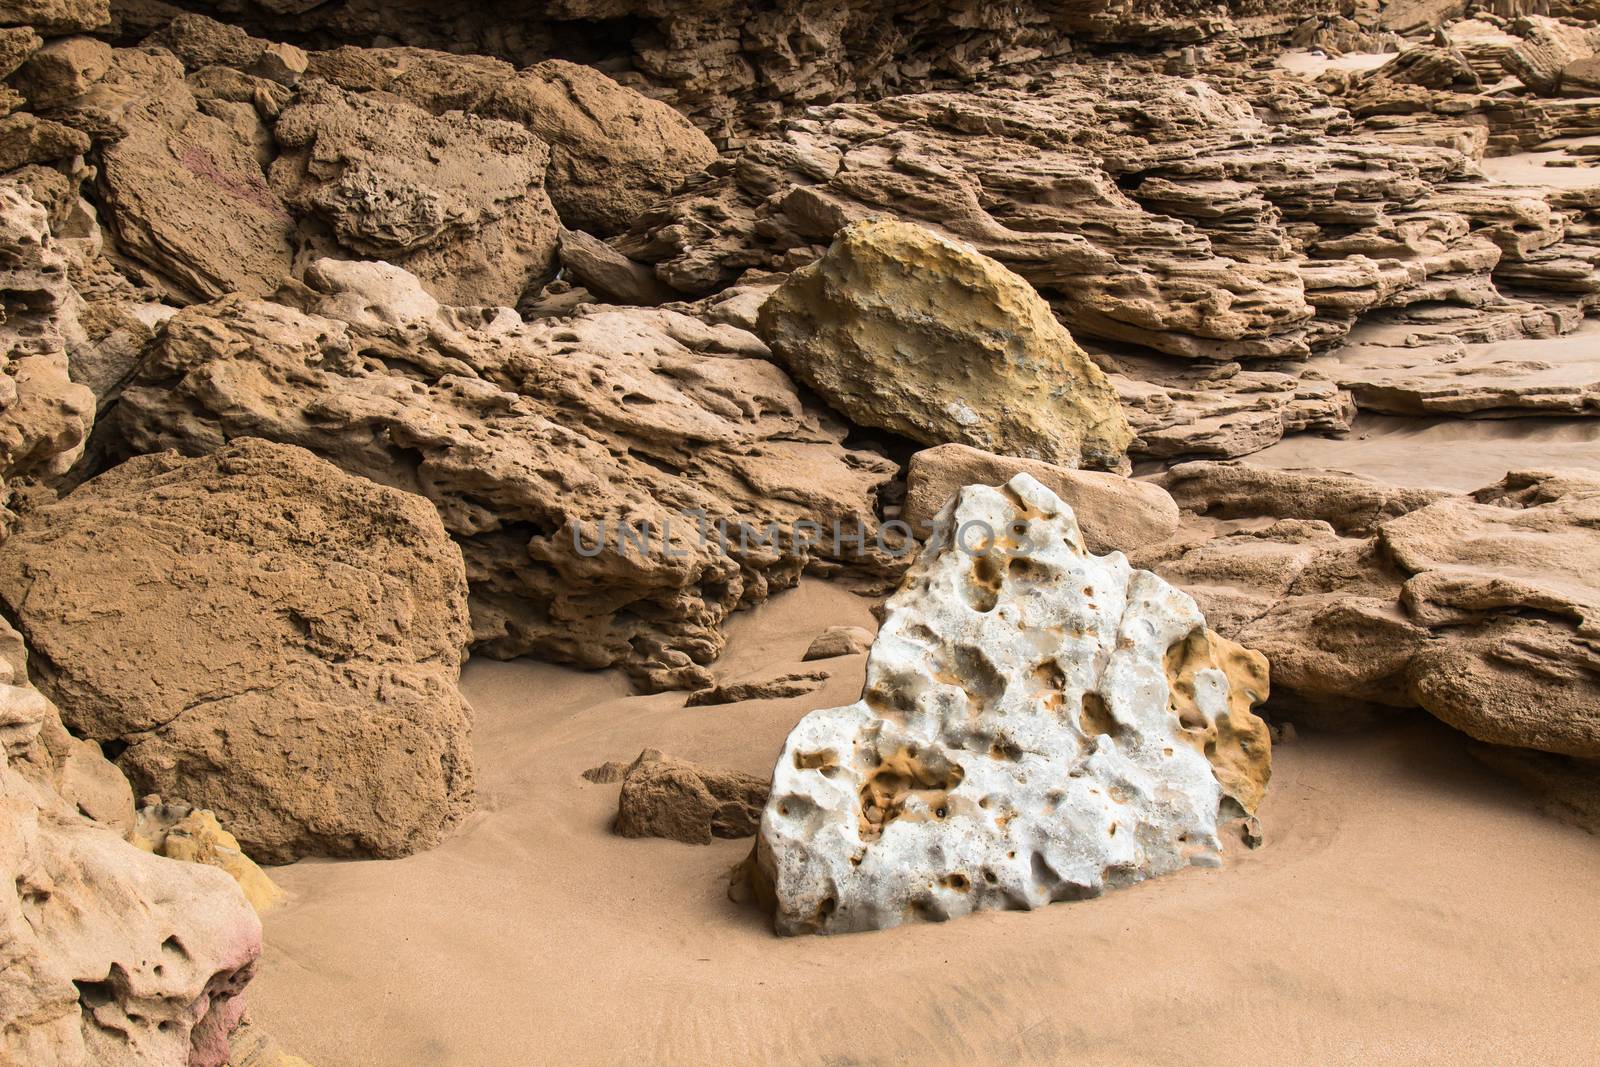 Sandy base of the beach at the Atlantic ocean shore in Morocco. Sandy colored rocks and white stone.